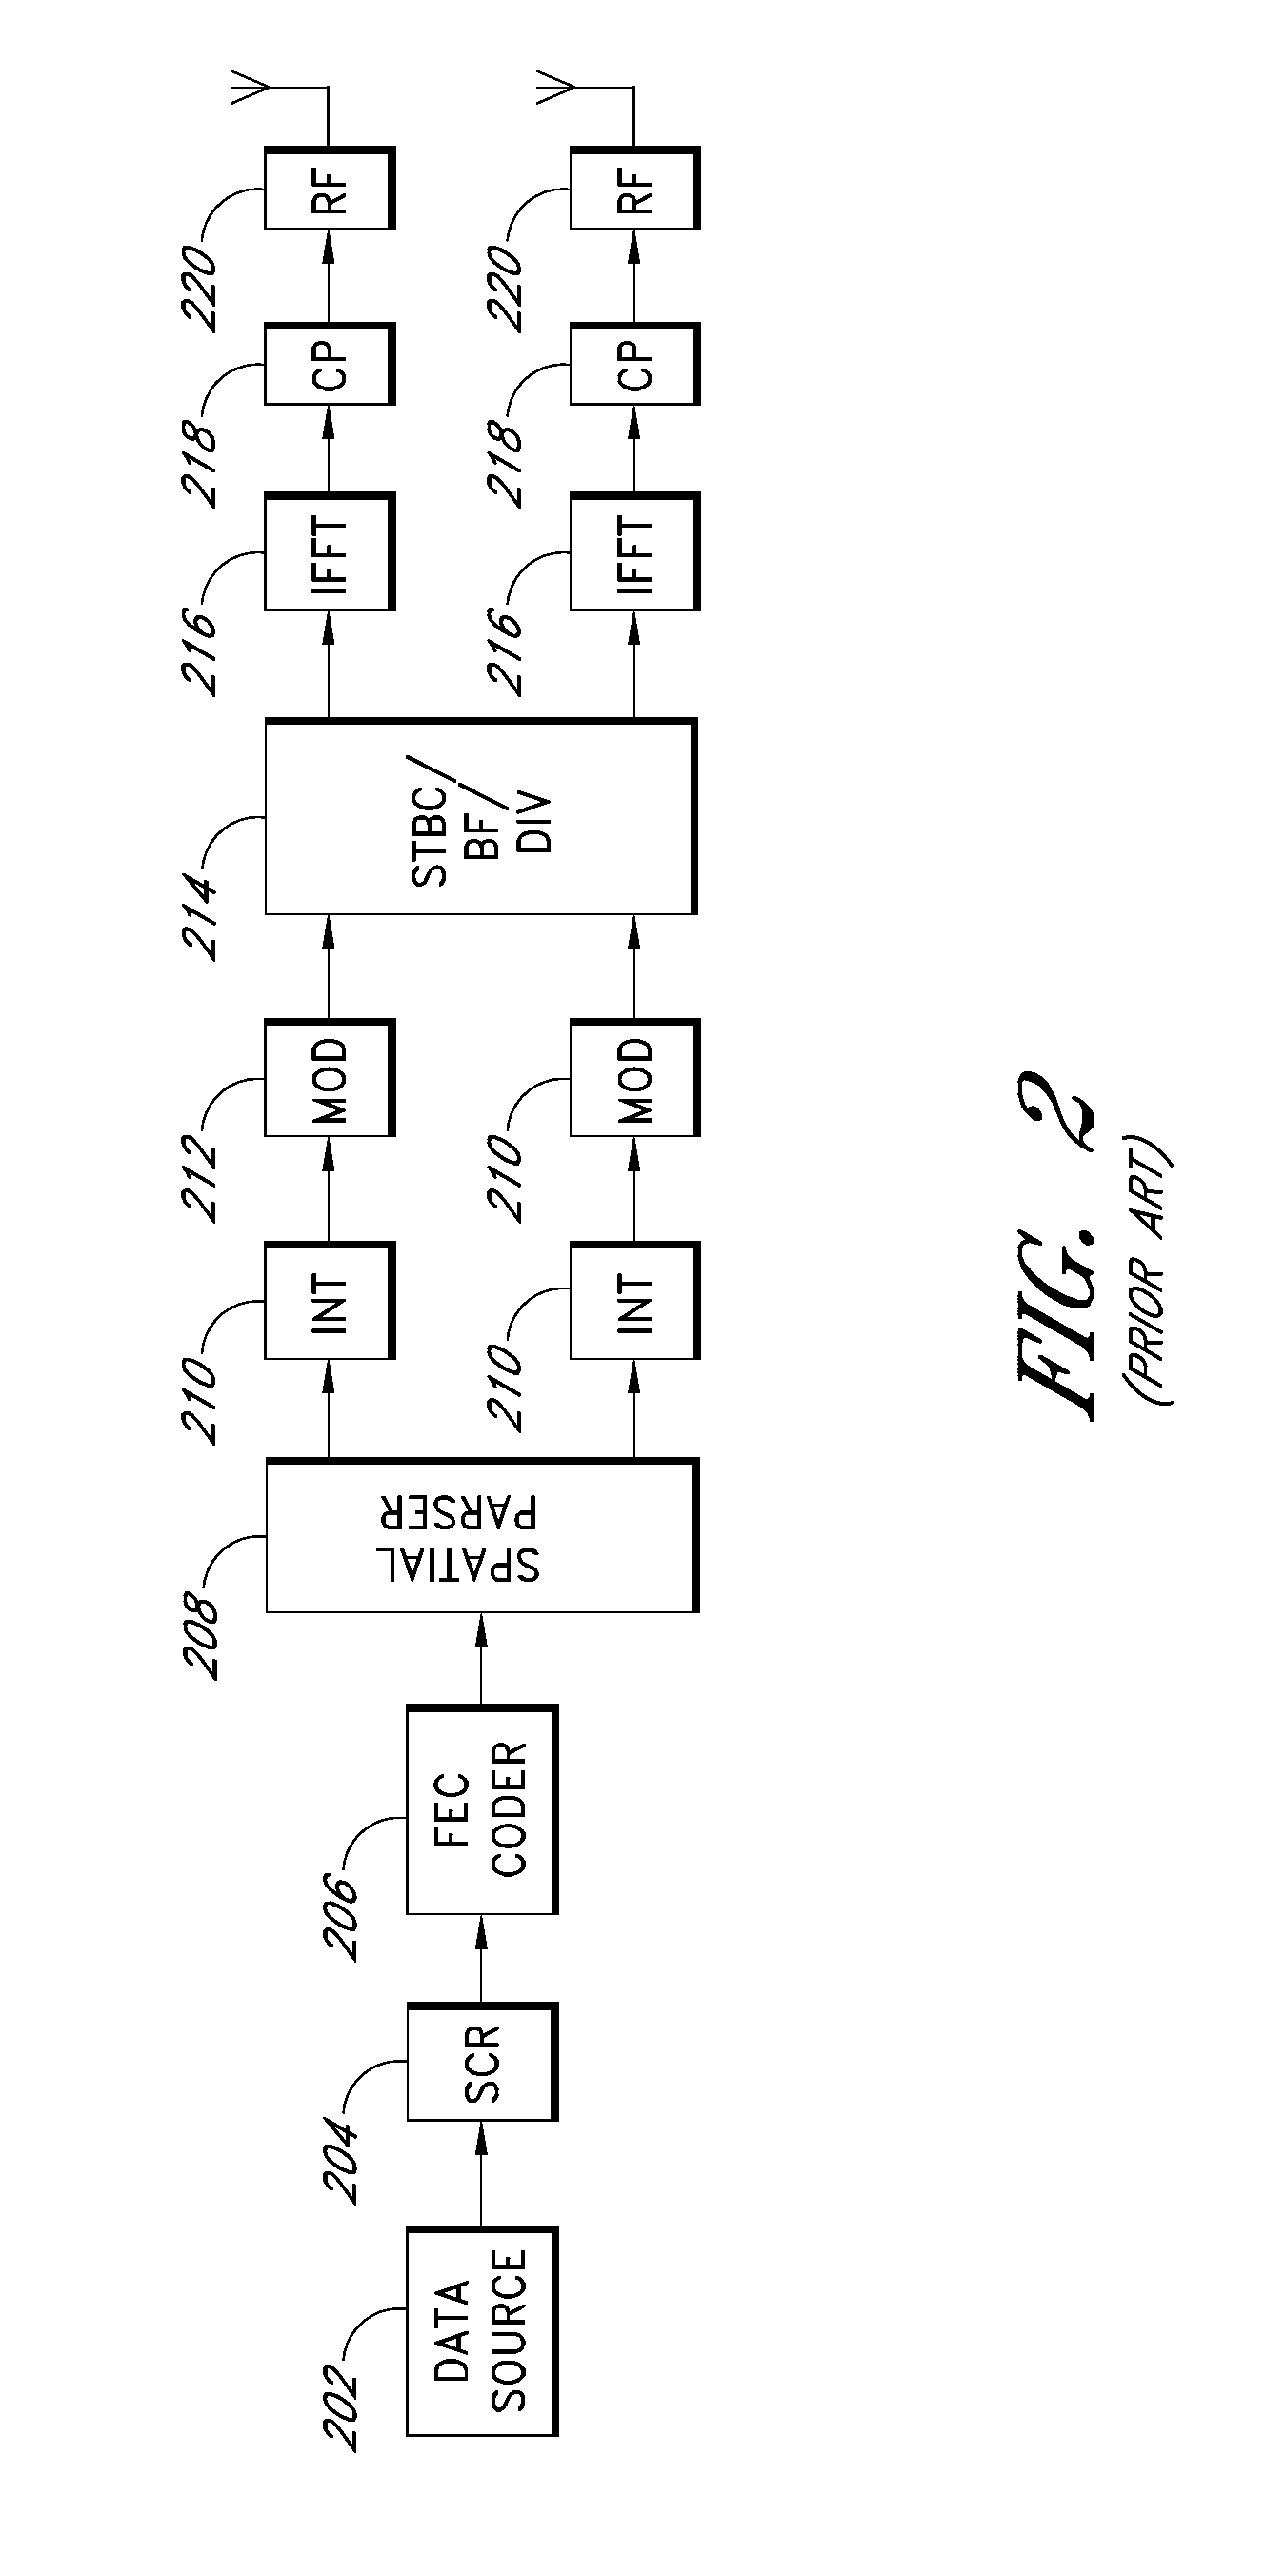 Interference erasure using soft decision weighting of the Viterbi decoder input in OFDM systems